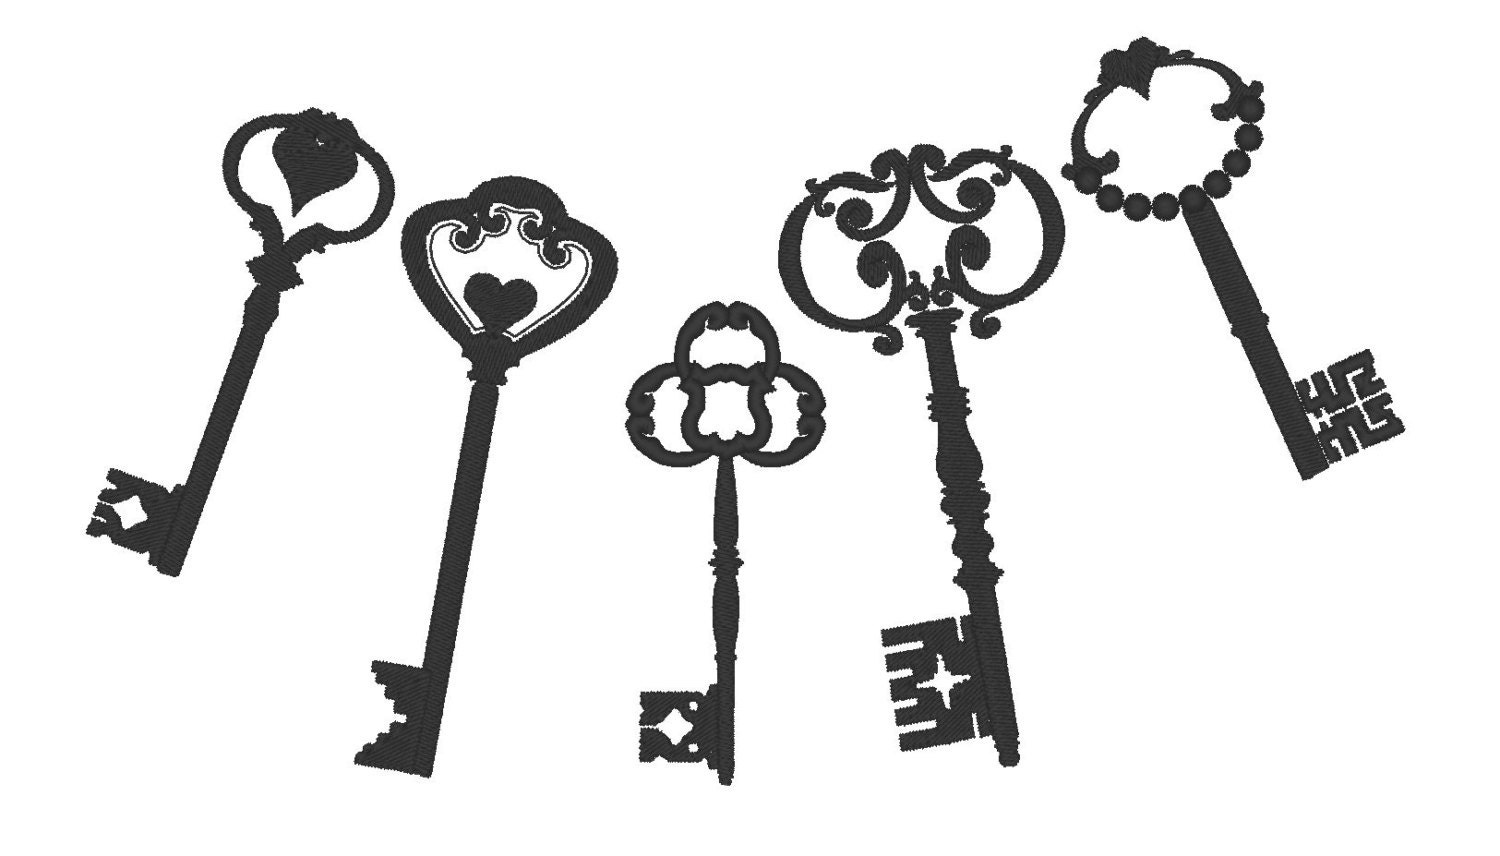 Skeleton keys for steampunk style projects  - machine embroidery designs and ITH felties